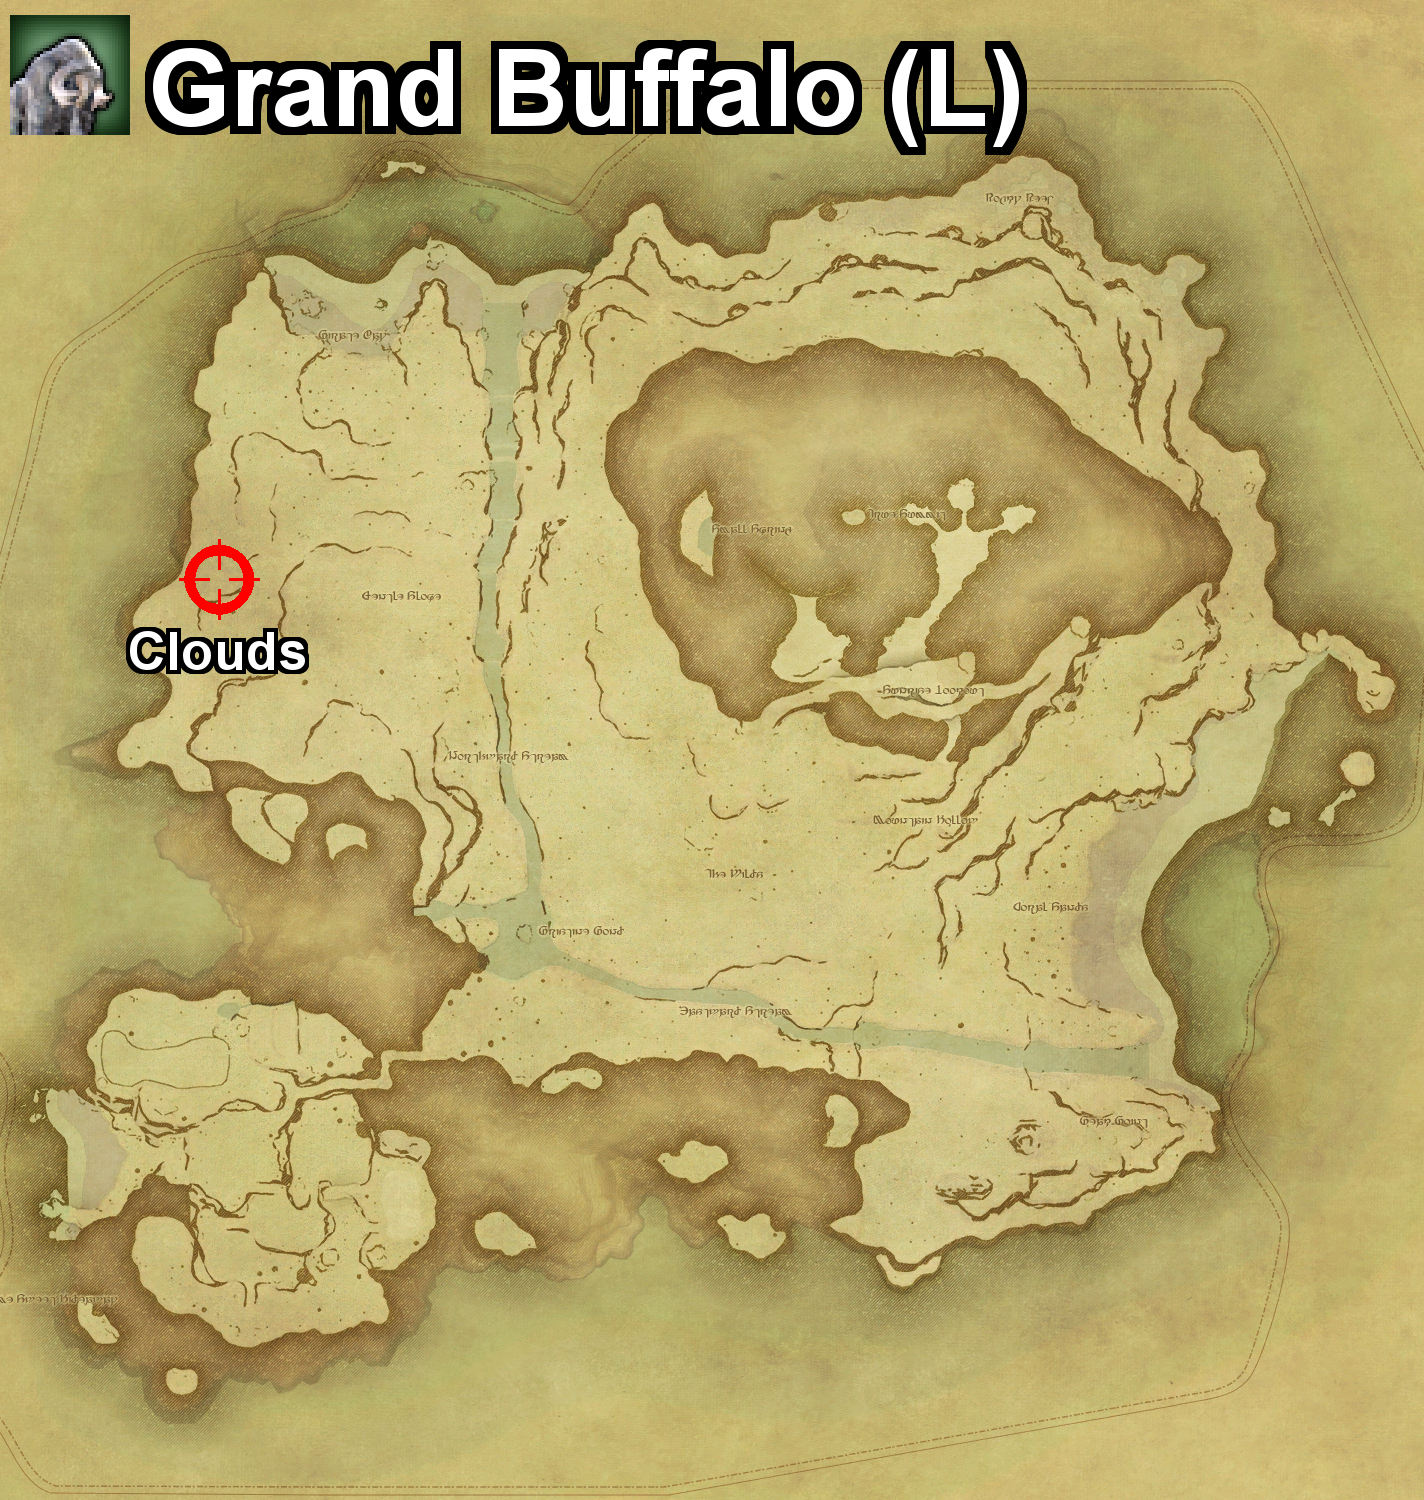 The location where the Grand Buffalo can be found, and the required conditions, on Island Sanctuary in Final Fantasy XIV.